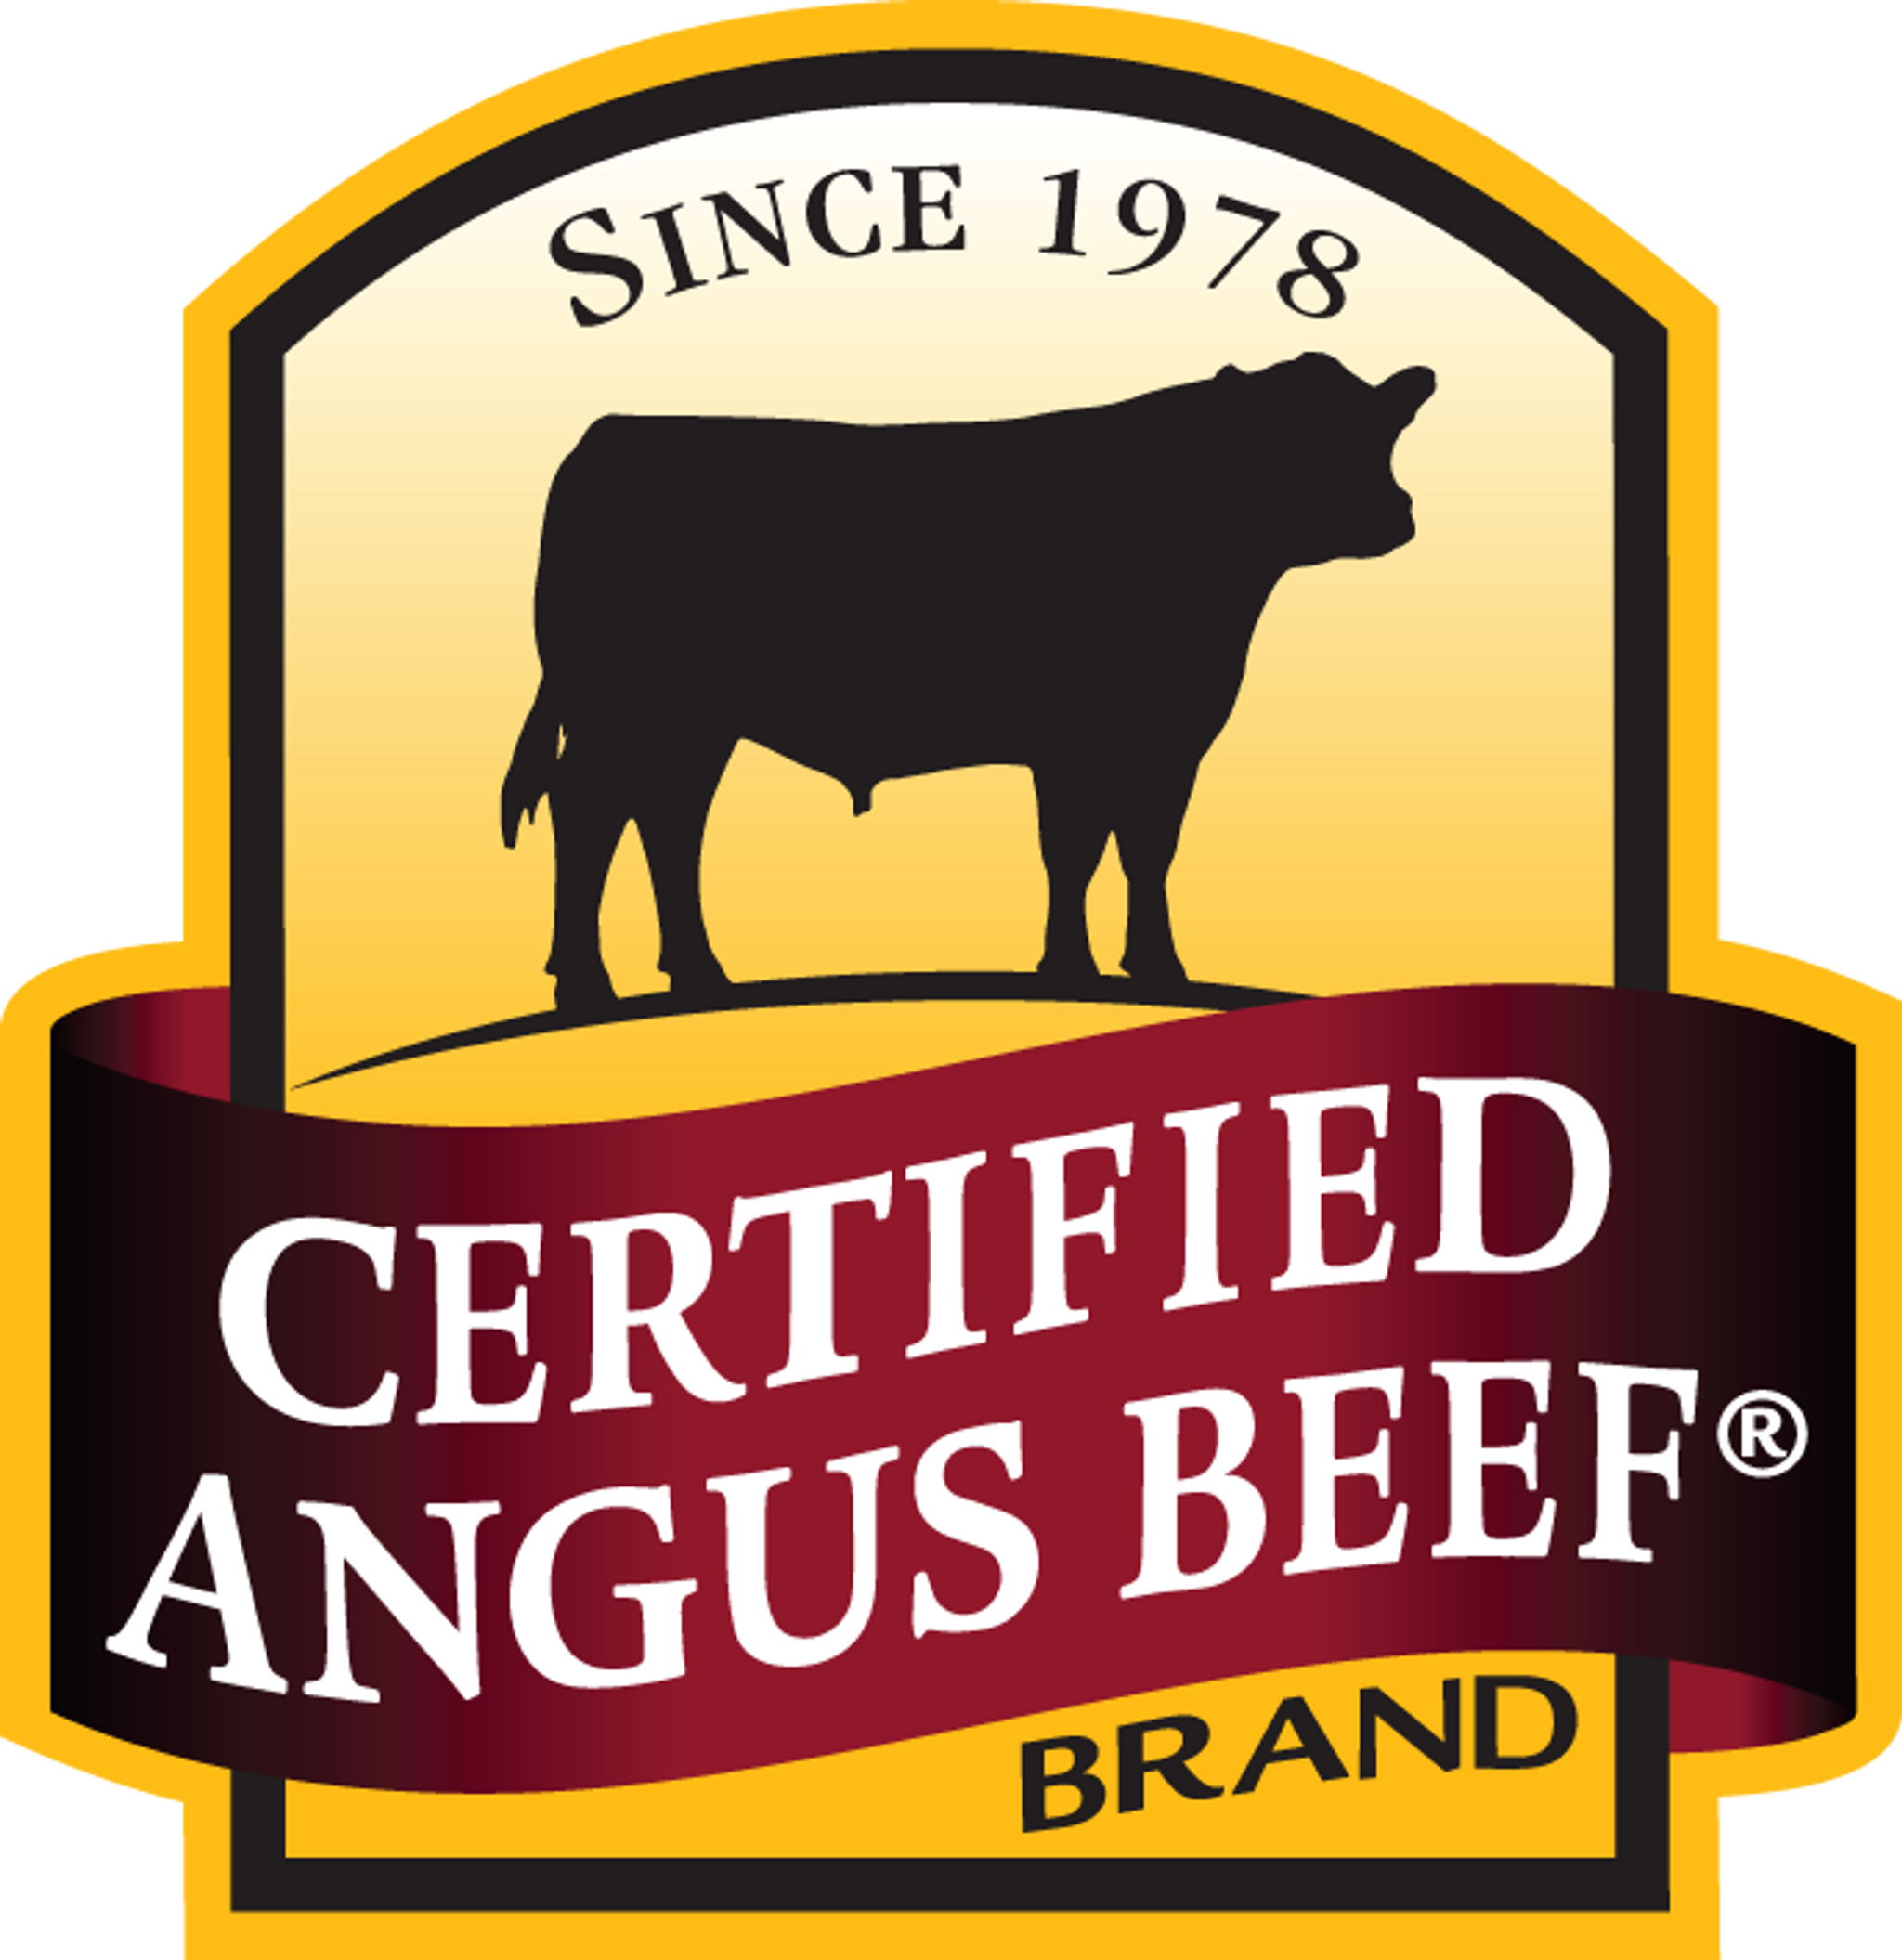 Hand select - Certified Angus Beef